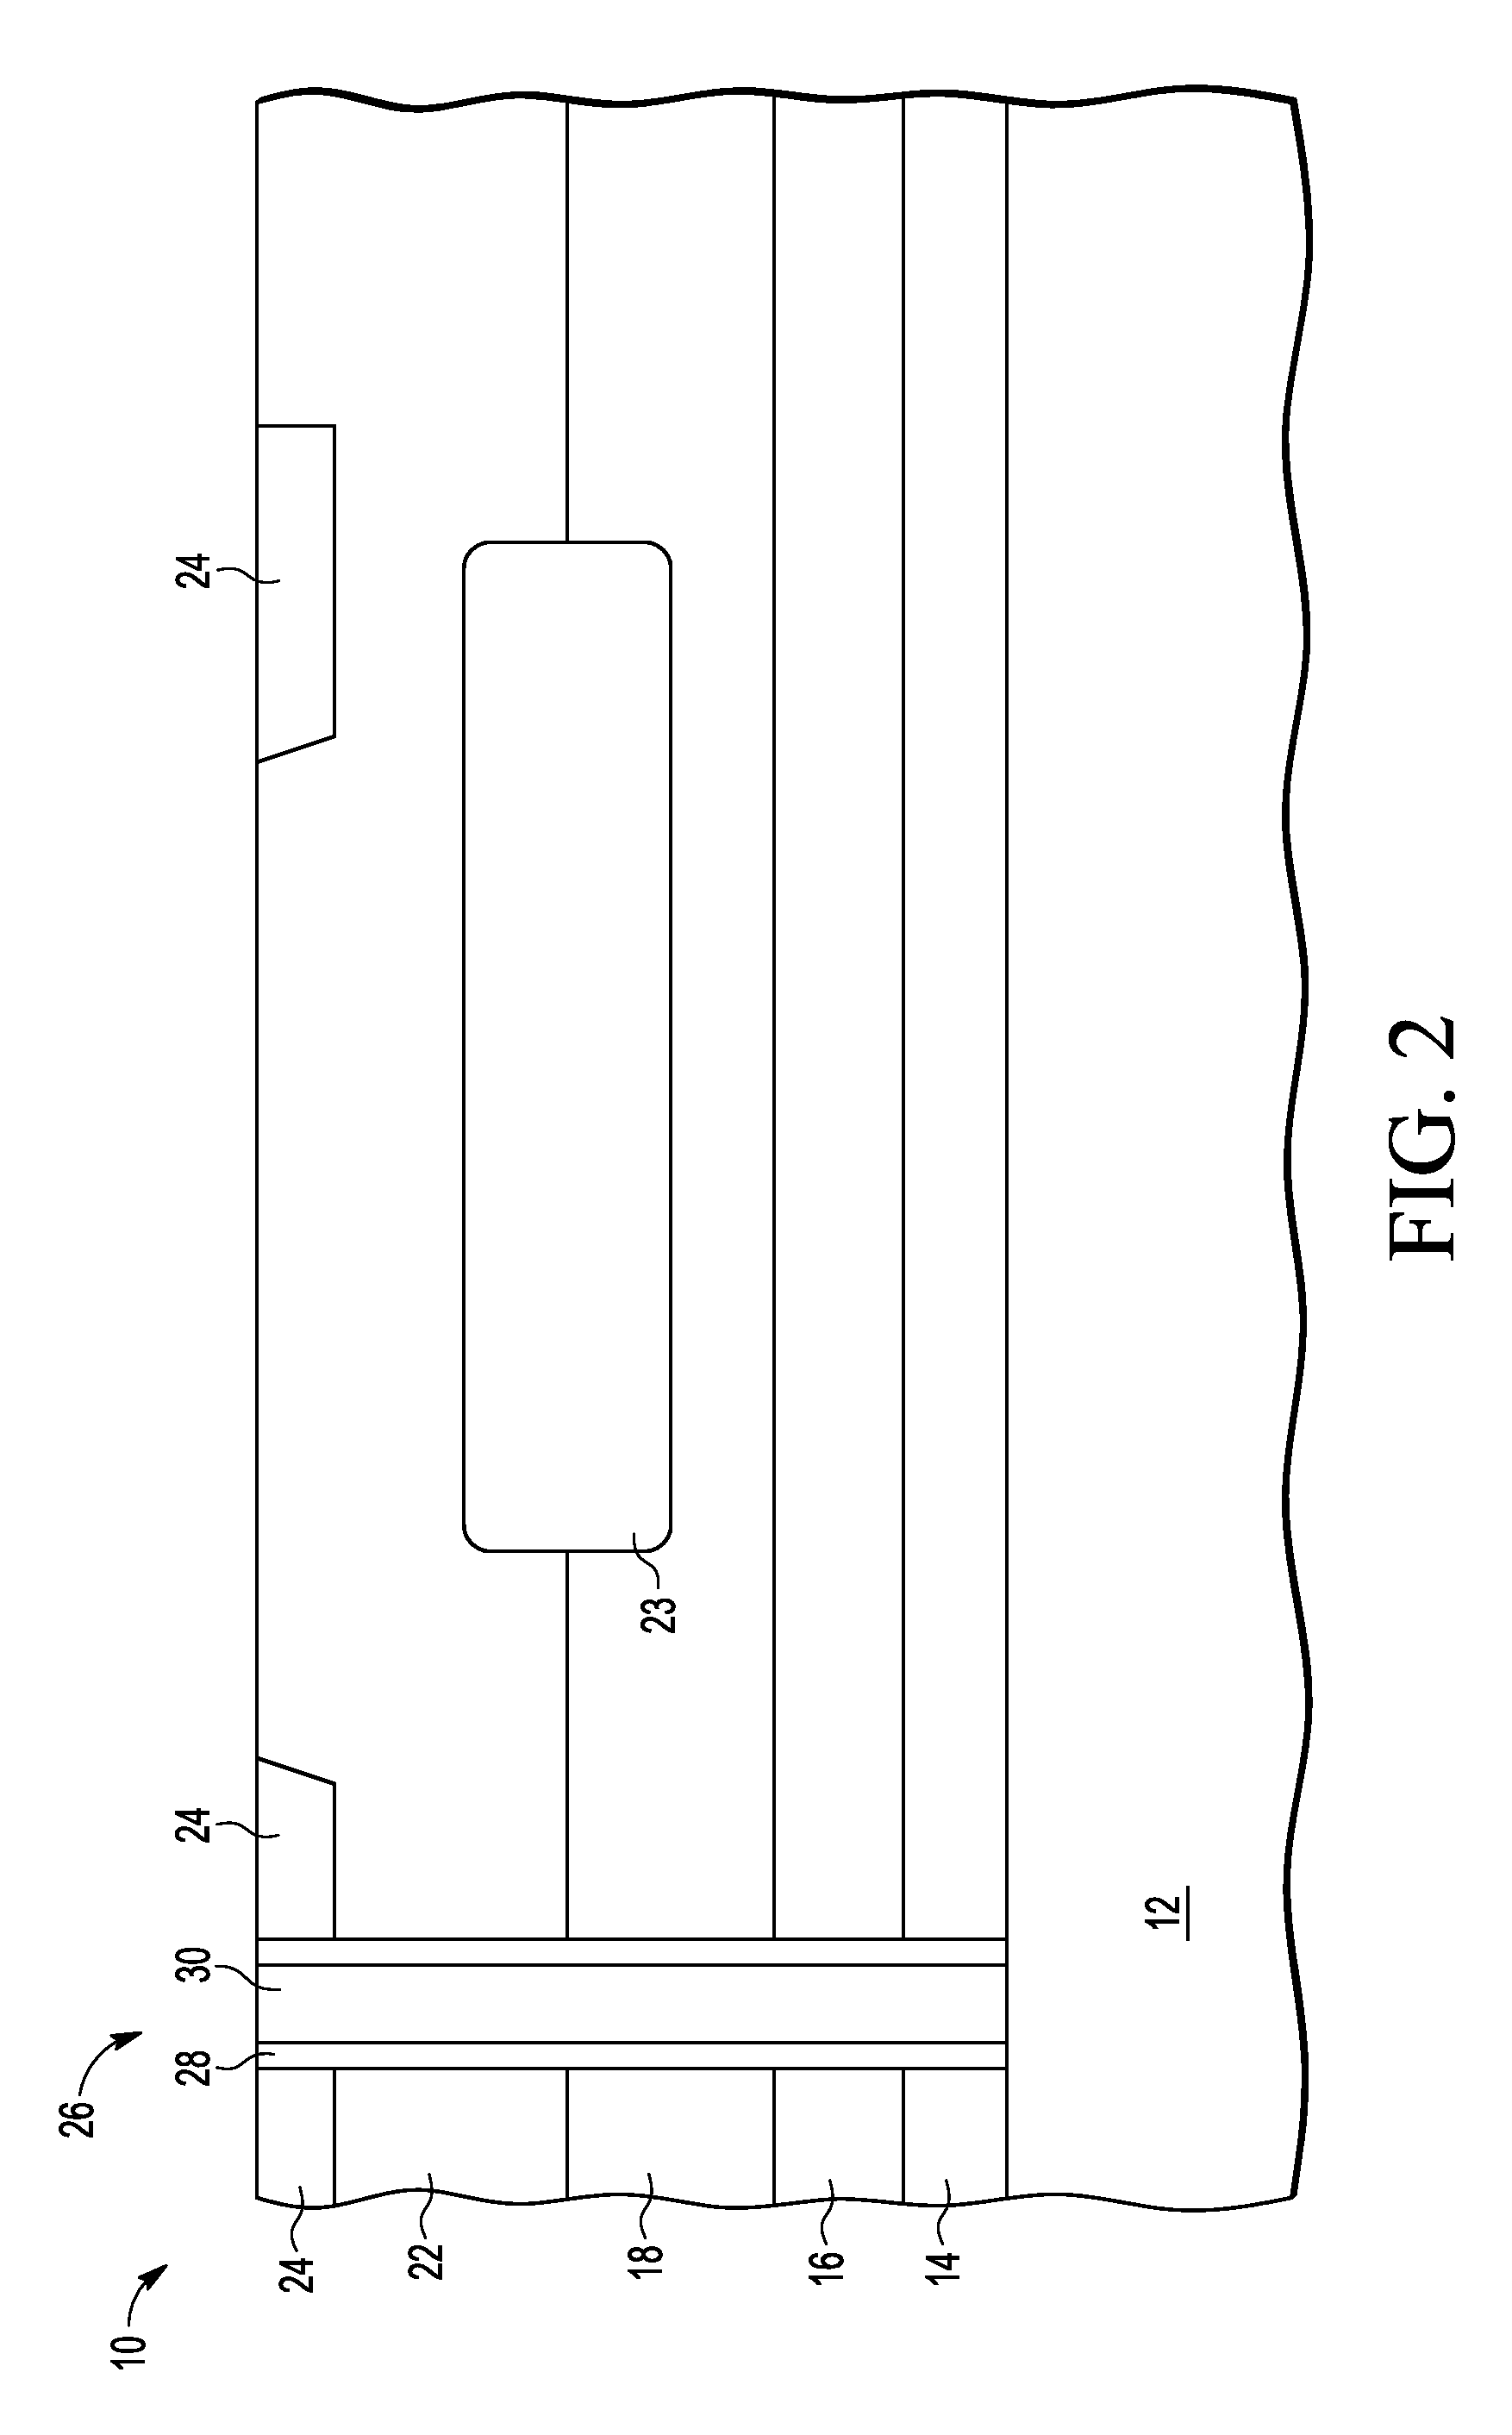 Laterally double diffused metal oxide semiconductor transistor having a reduced surface field structure and method therefor